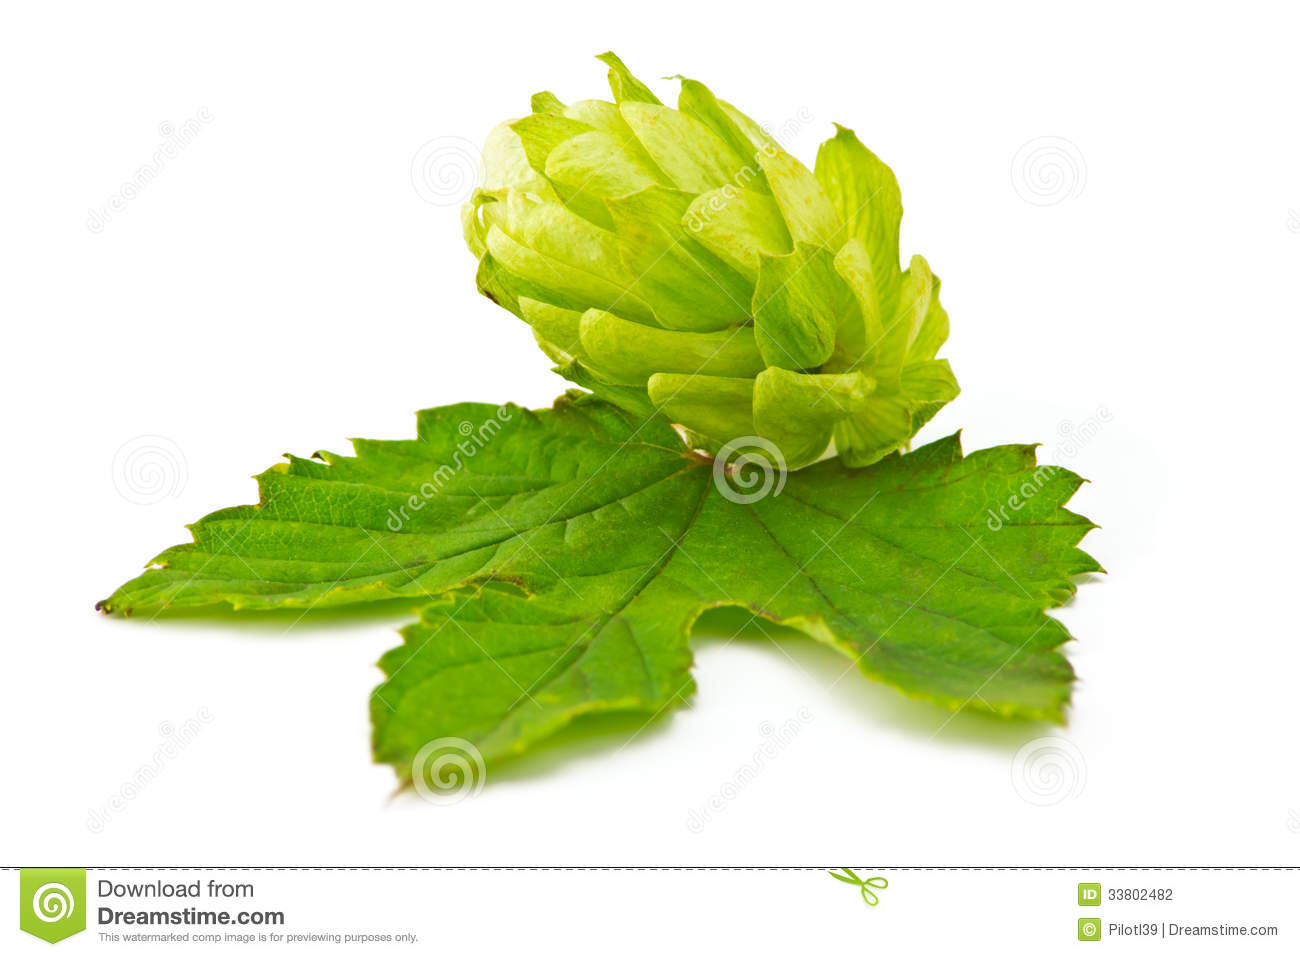 Hop Cones With Green Leaf On A White Background